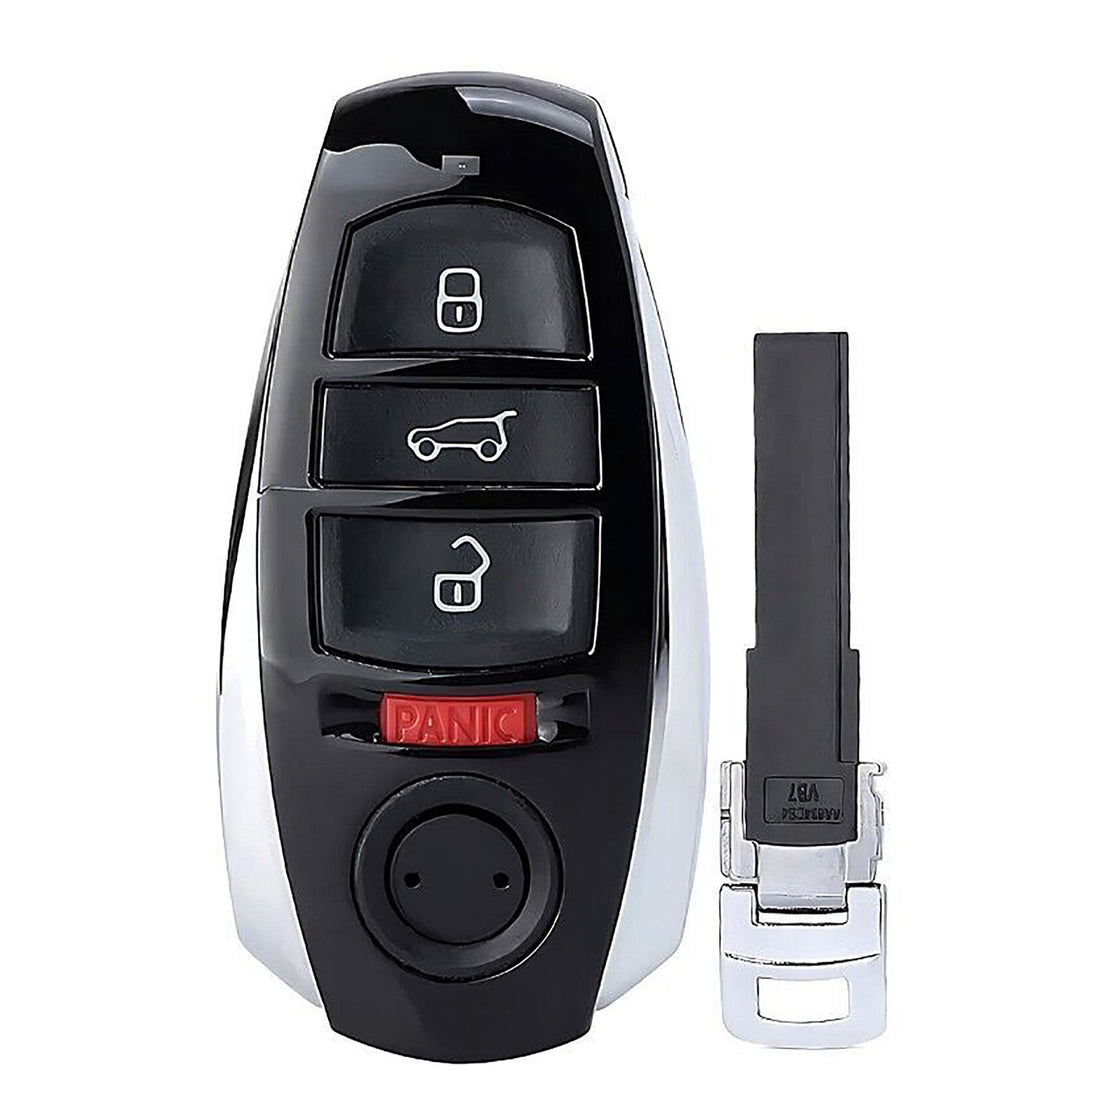 1x New Replacement Proximity Key Fob Remote Compatible with & Fit For Volkswagen Touareg - MPN IYZVWTOUA-02